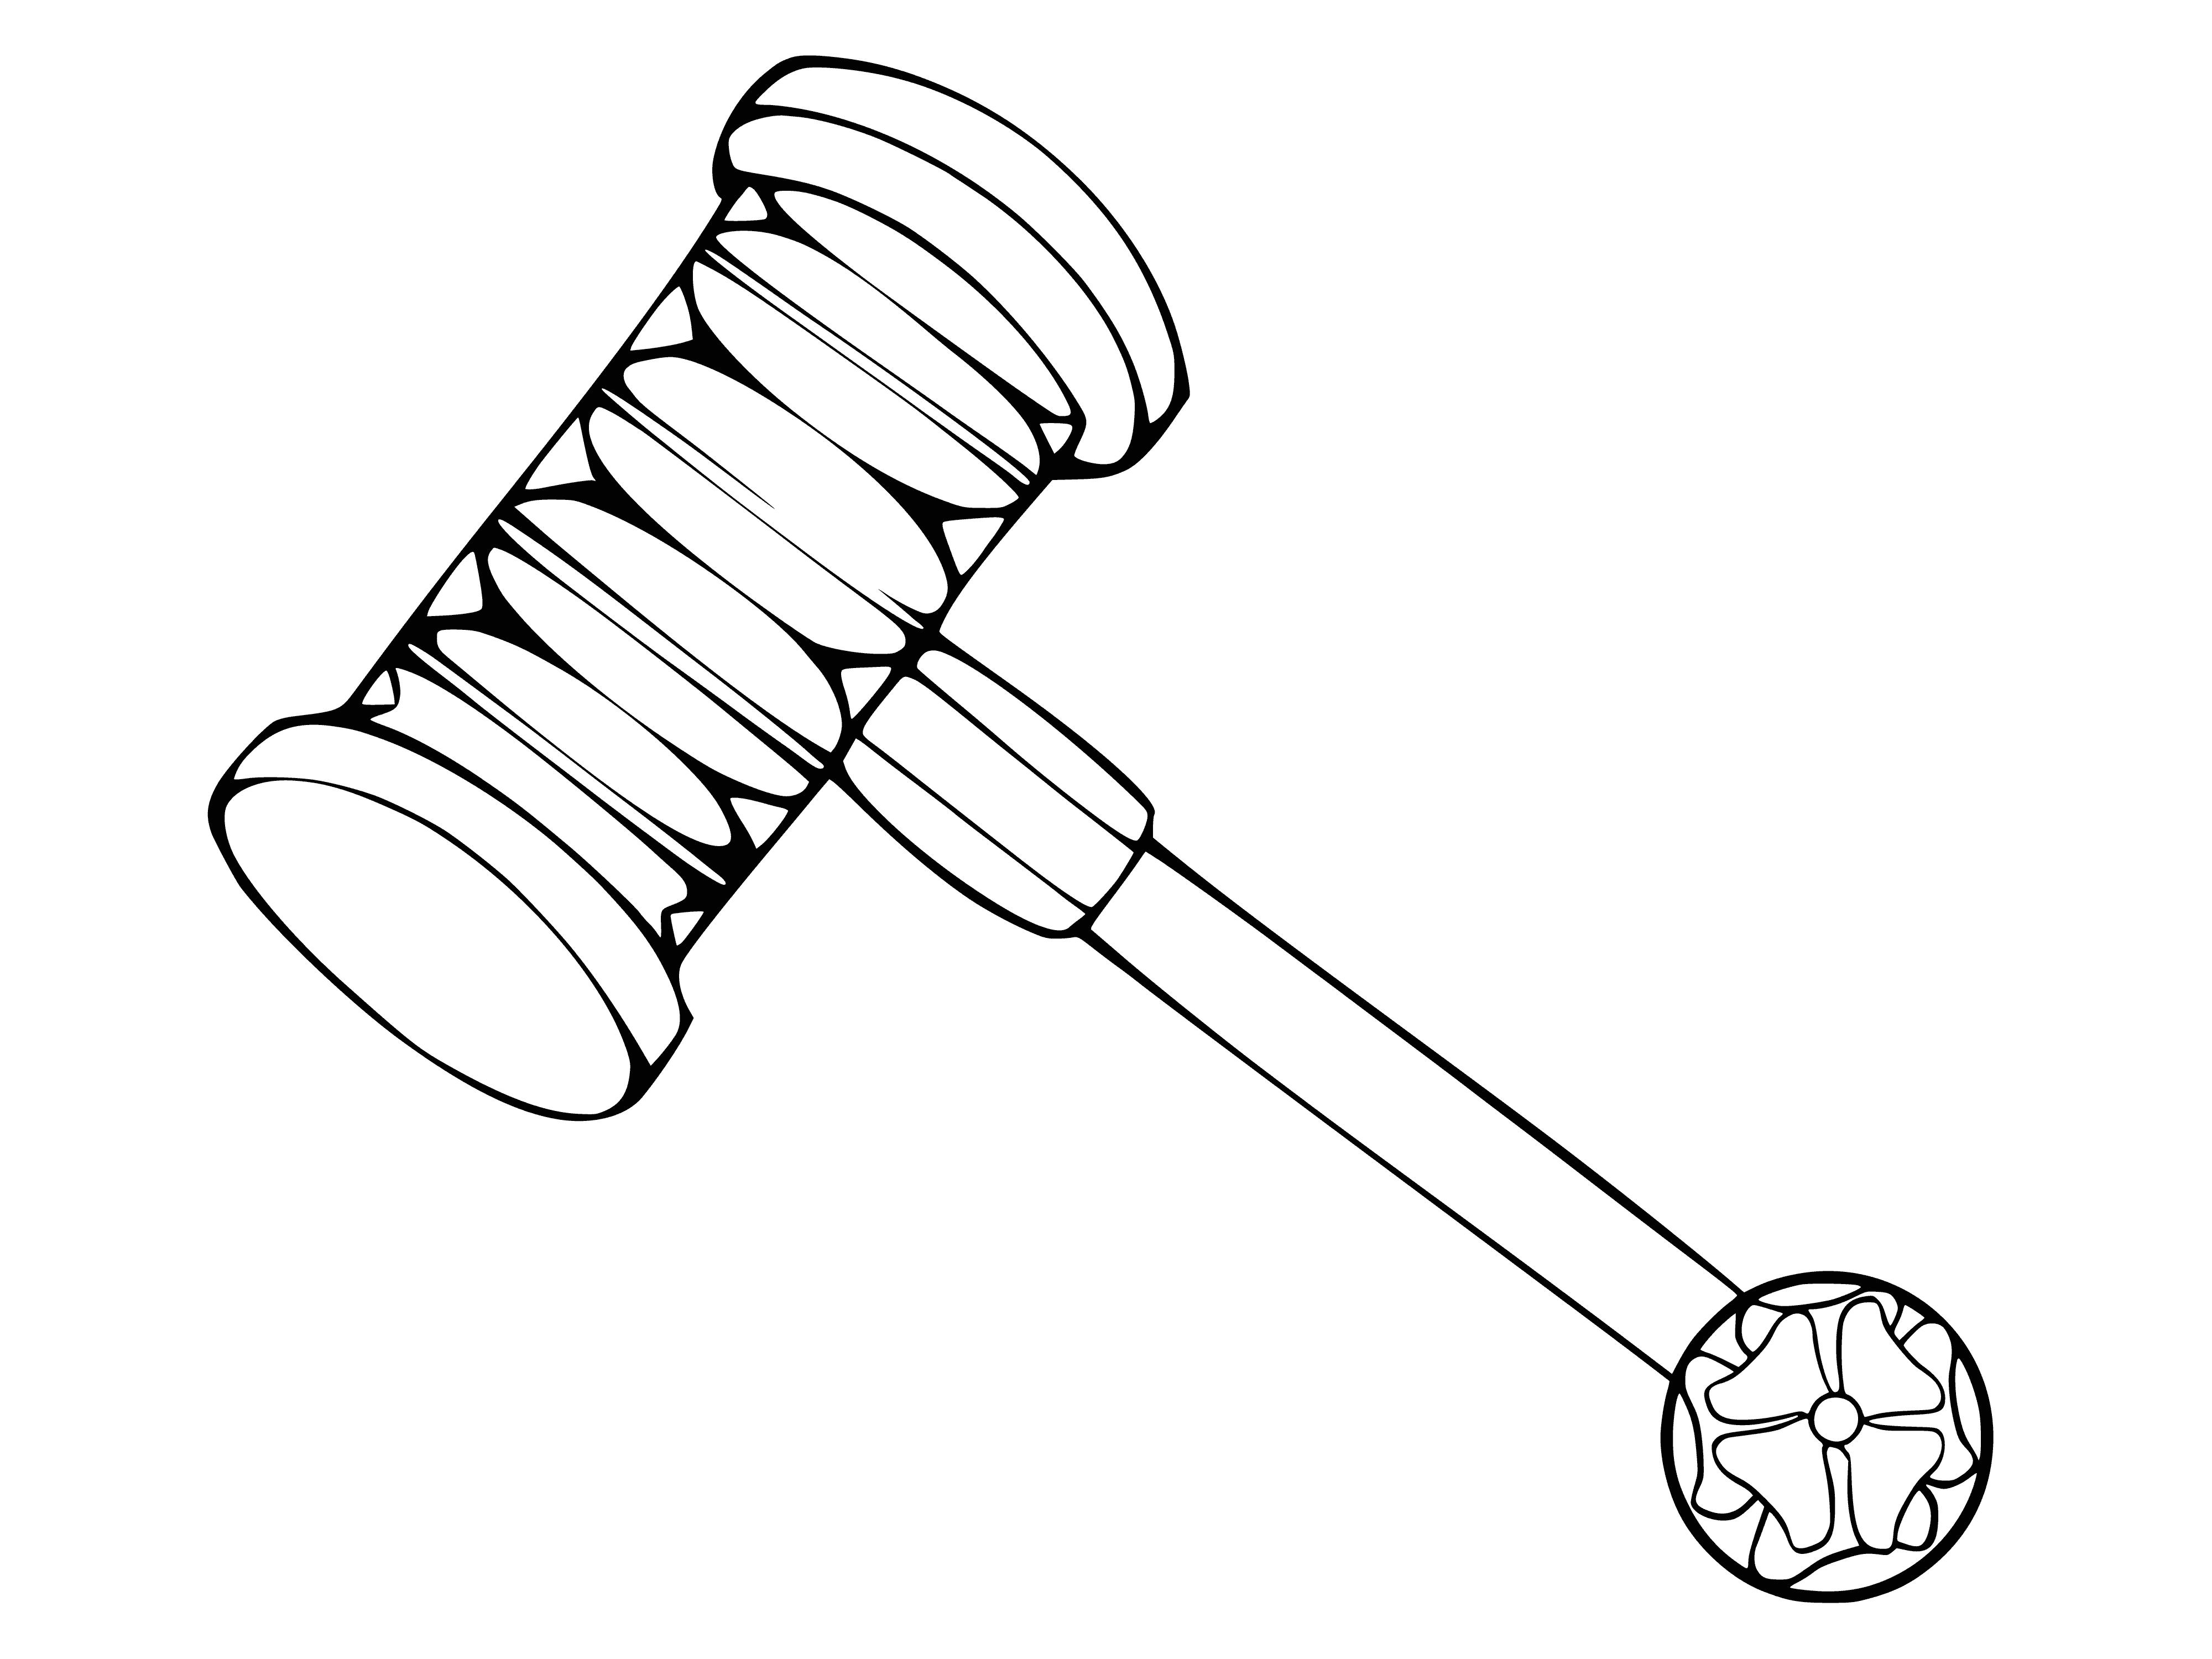 coloring page: A musical gavel made of wood with a black handle and silver head with designs, plus a band around middle.